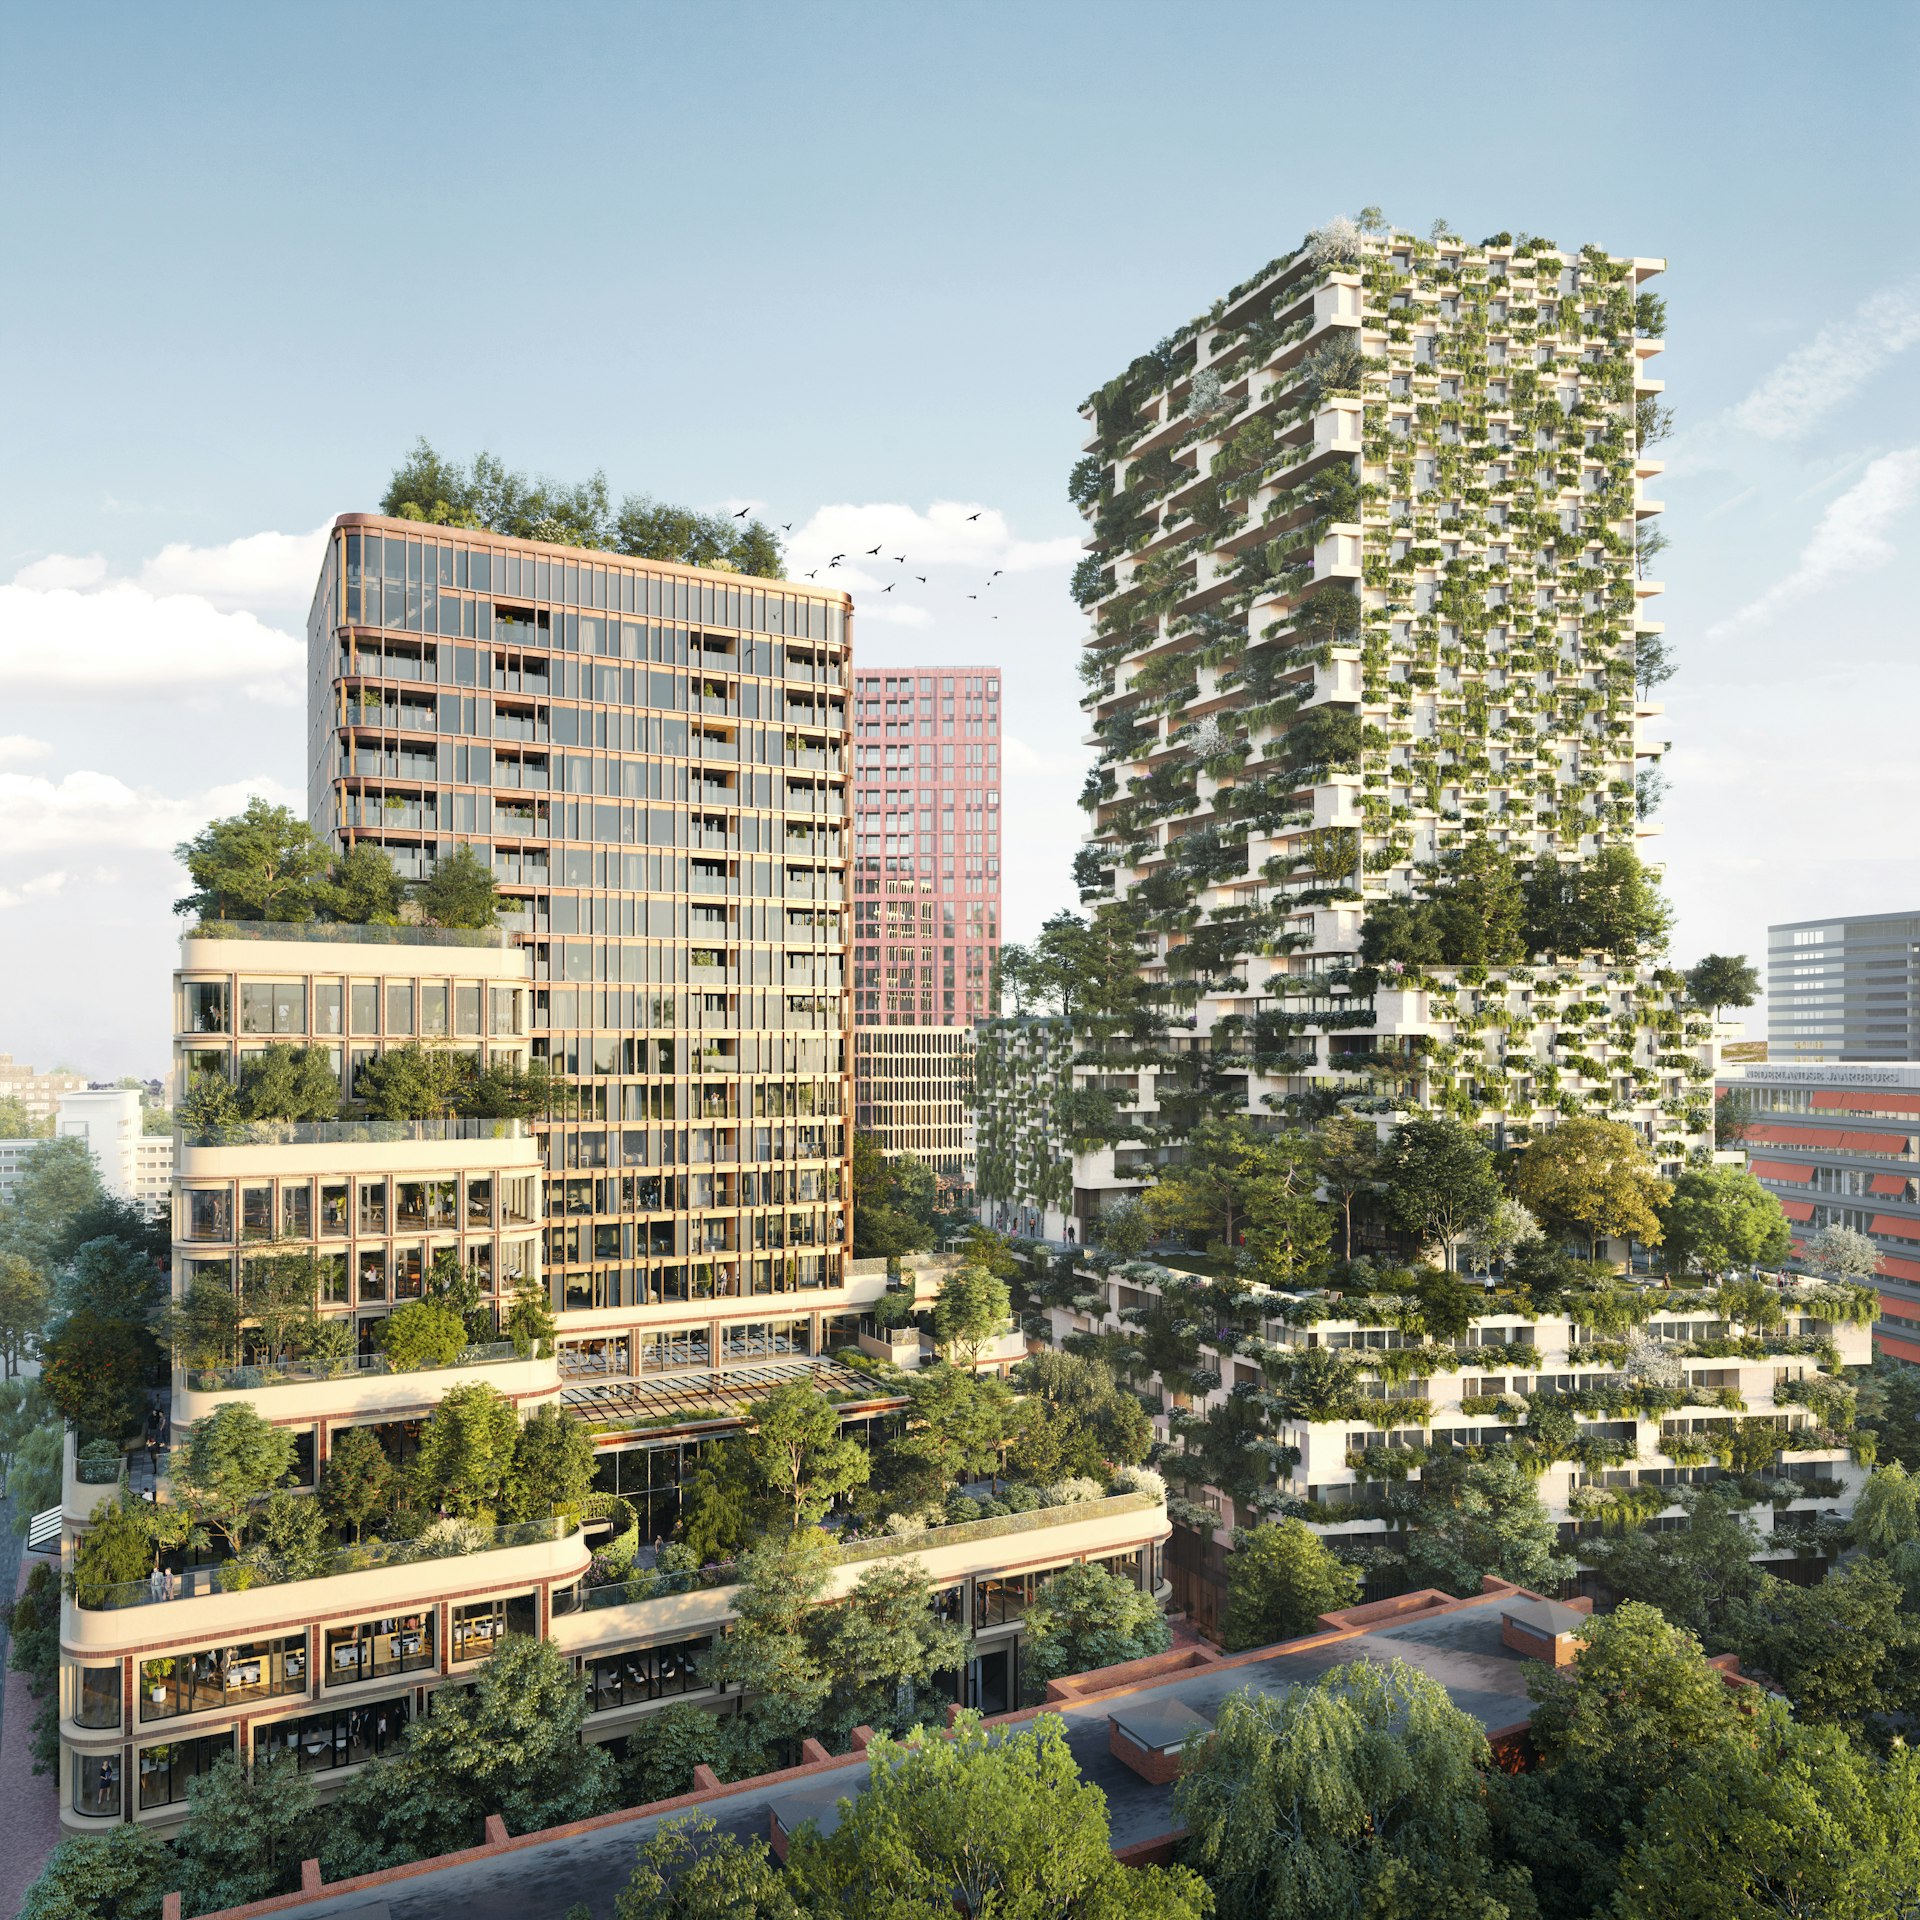 Rendering of green urban development of high-rises with green roofs and facades